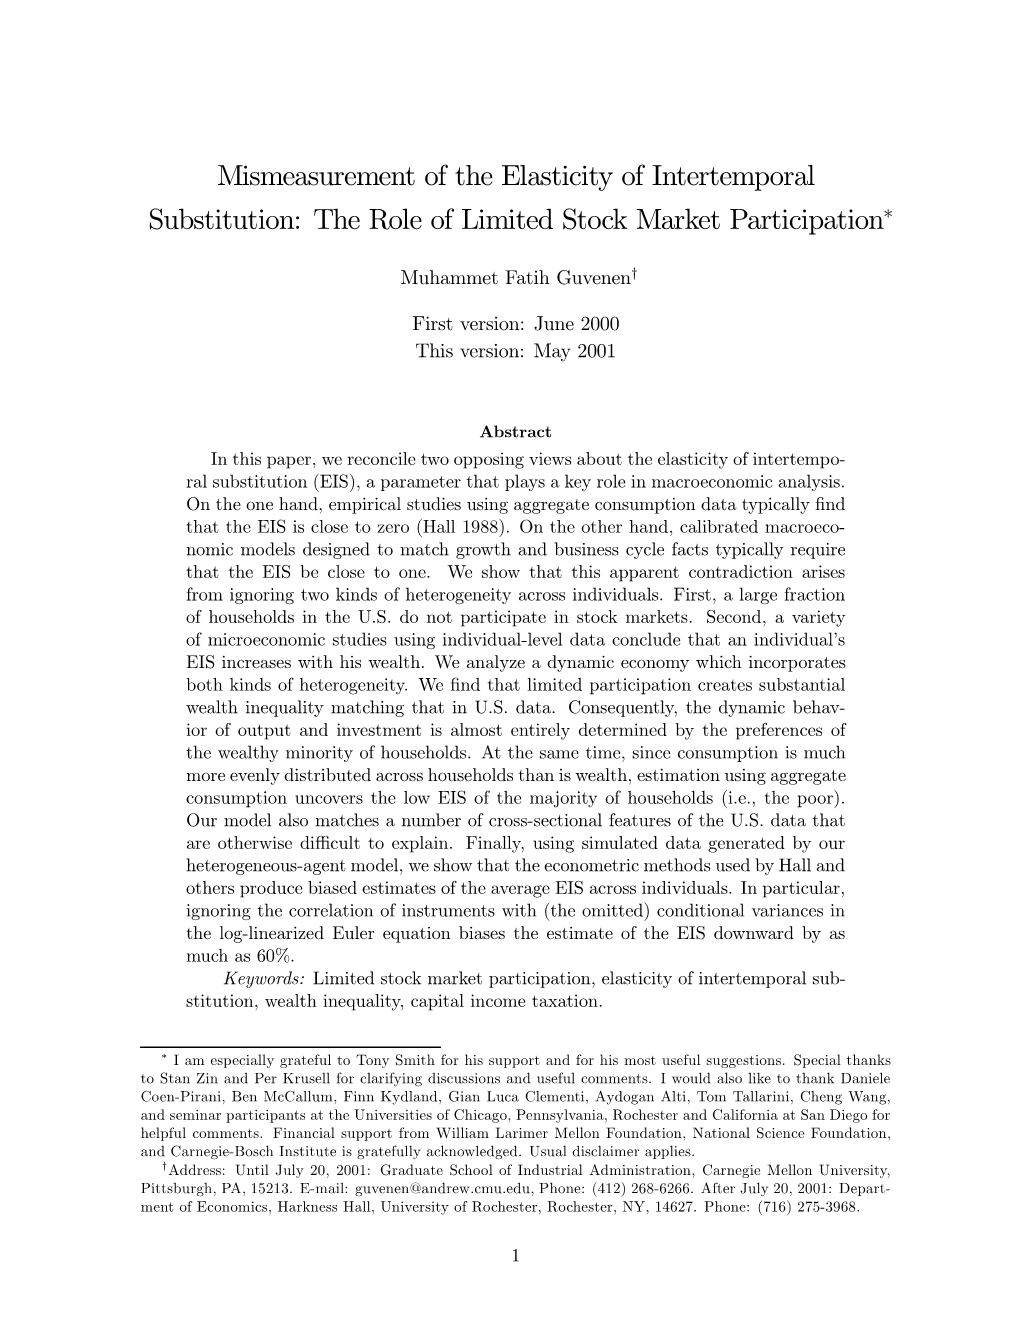 Mismeasurement of the Elasticity of Intertemporal Substitution: the Role